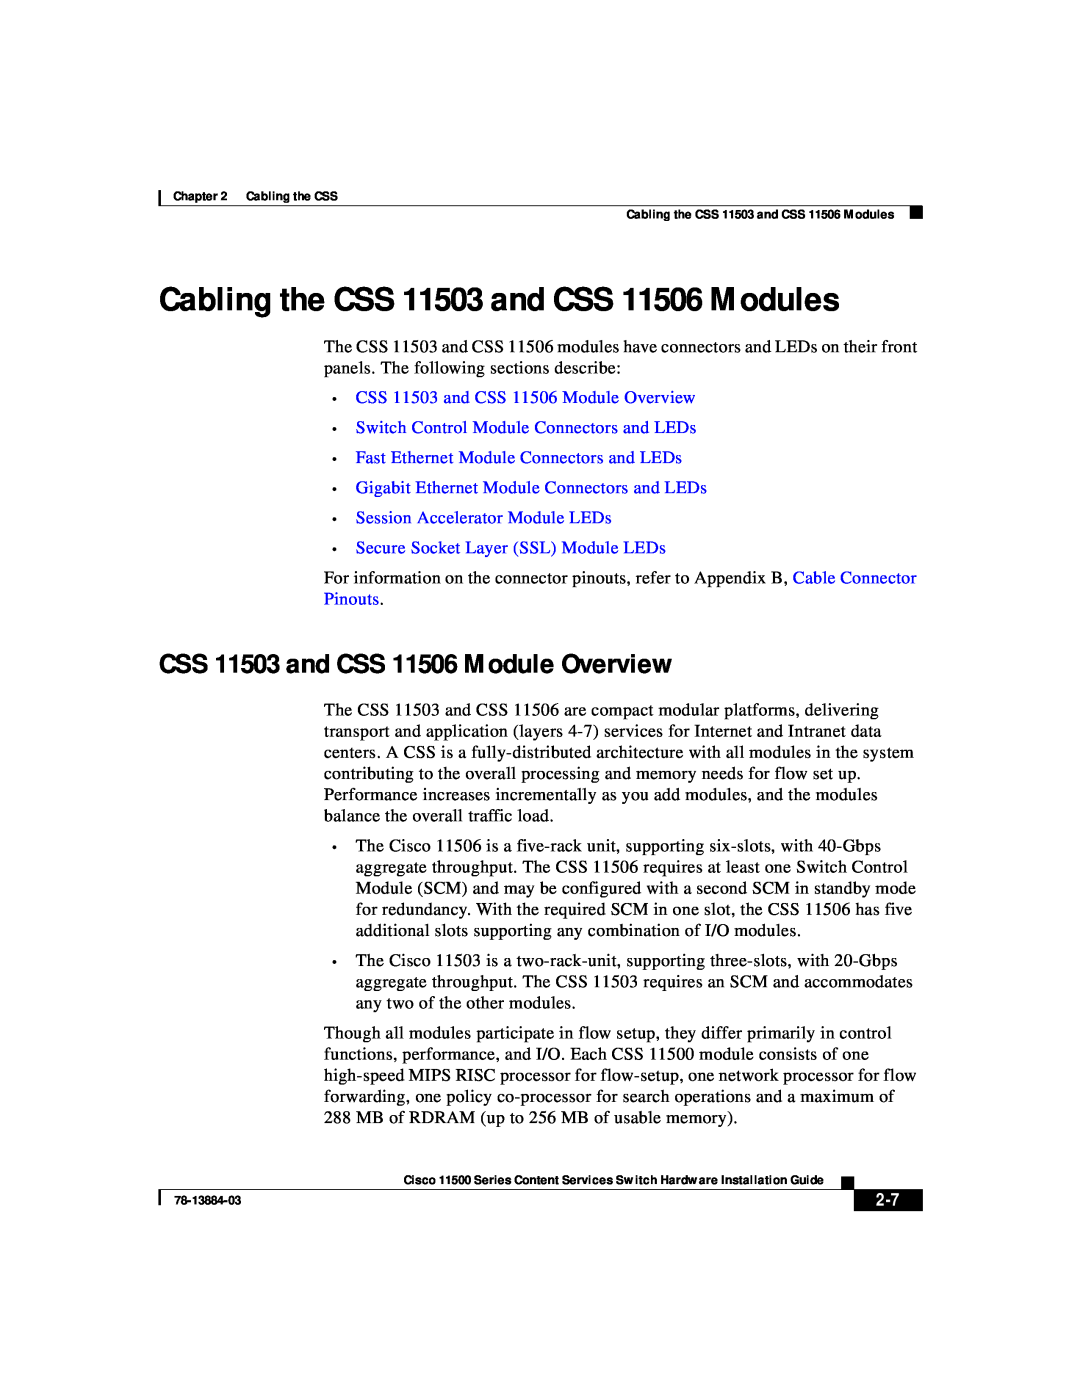 Cisco Systems 11500 Series manual CSS 11503 and CSS 11506 Module Overview, Cabling the CSS 11503 and CSS 11506 Modules 